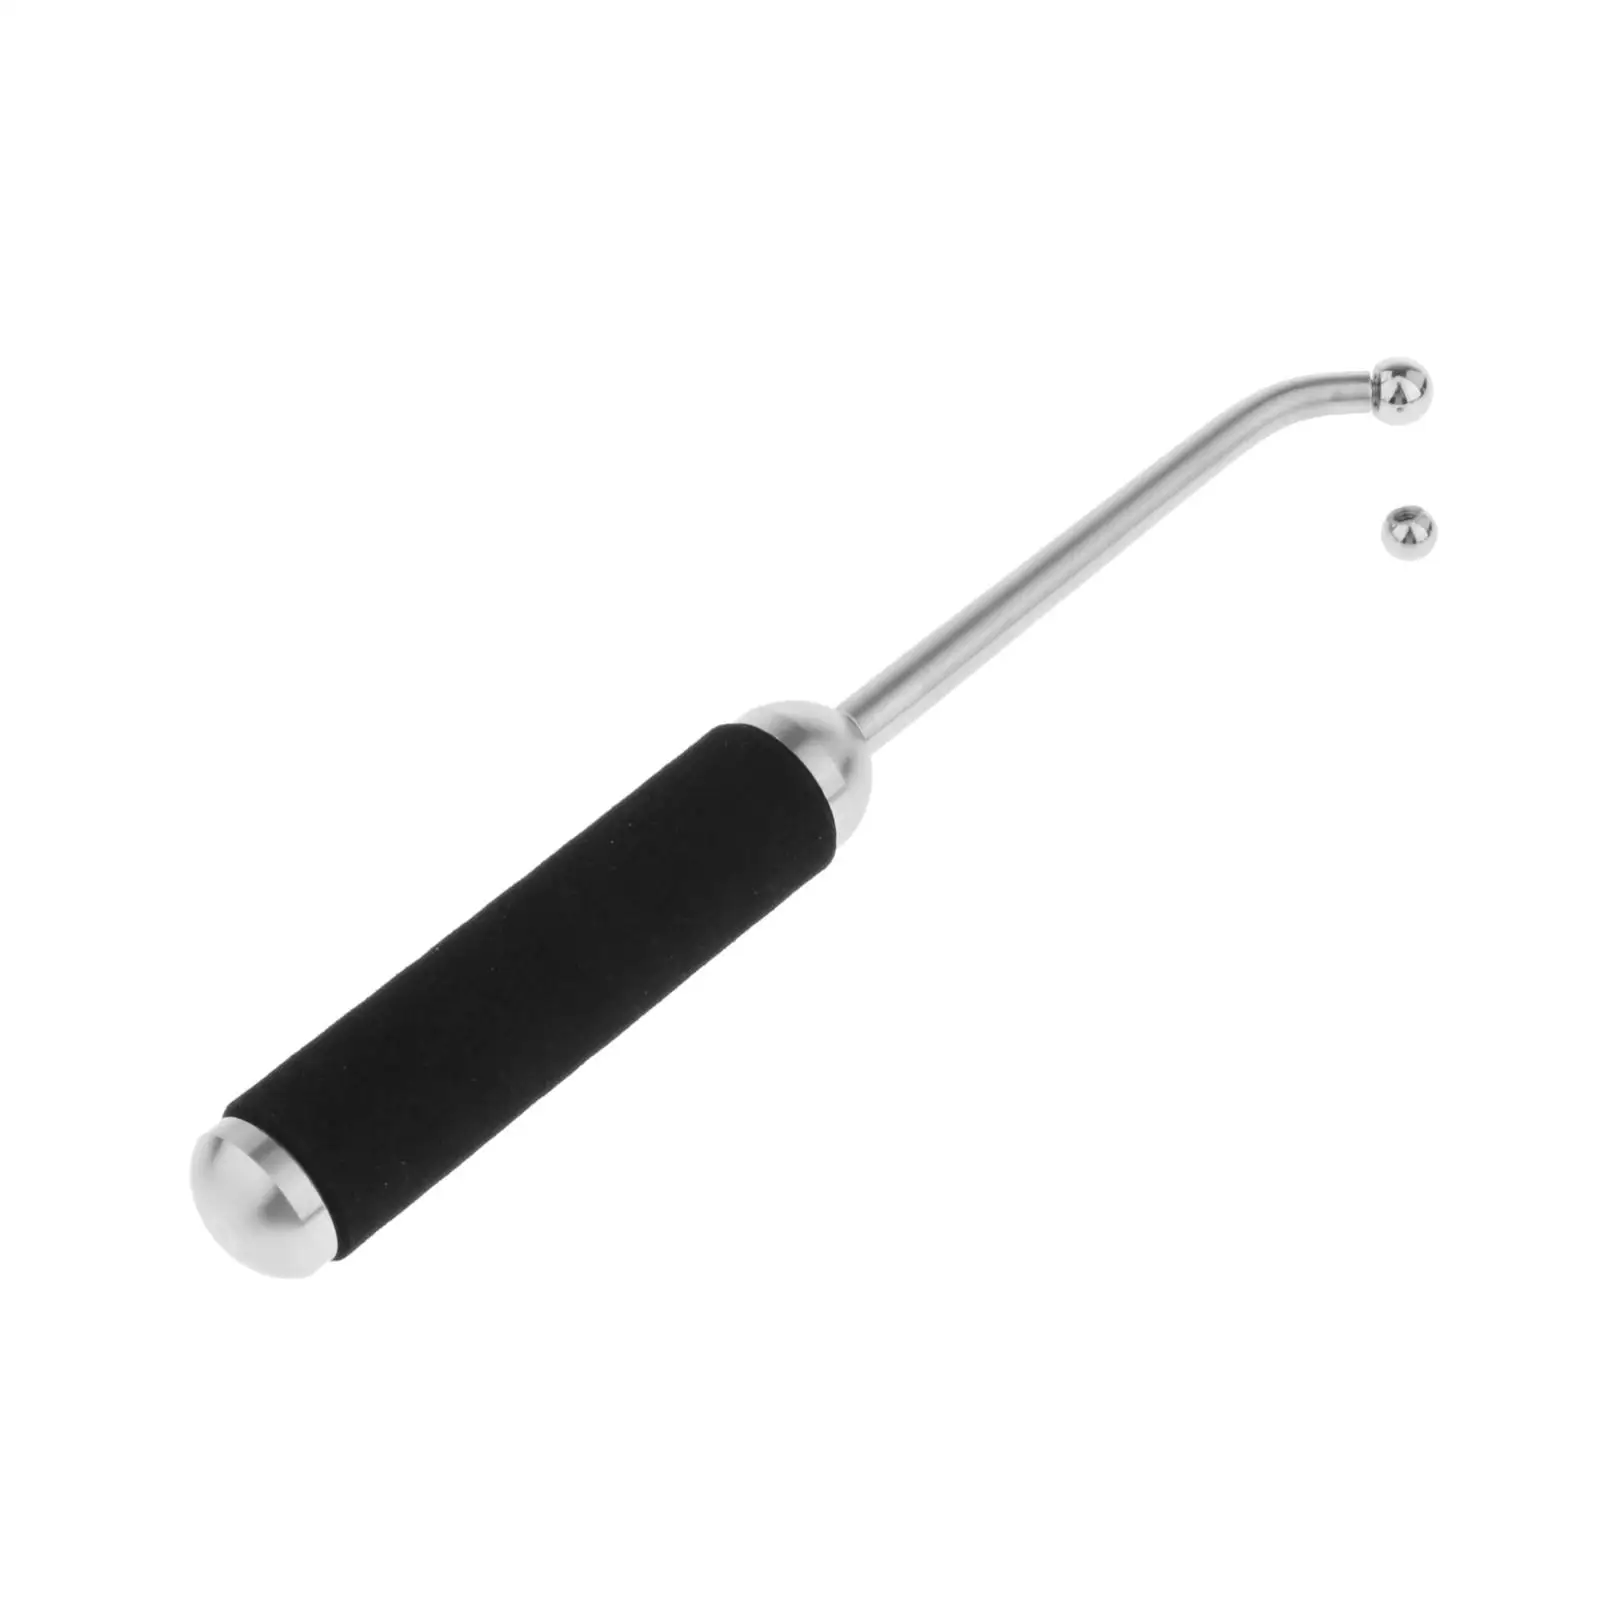 Trumpet Elbow Repair Tool Handle Maintenance Wrench Tools Wind Instrument Elbow Maintenance Care Instruments Accessories